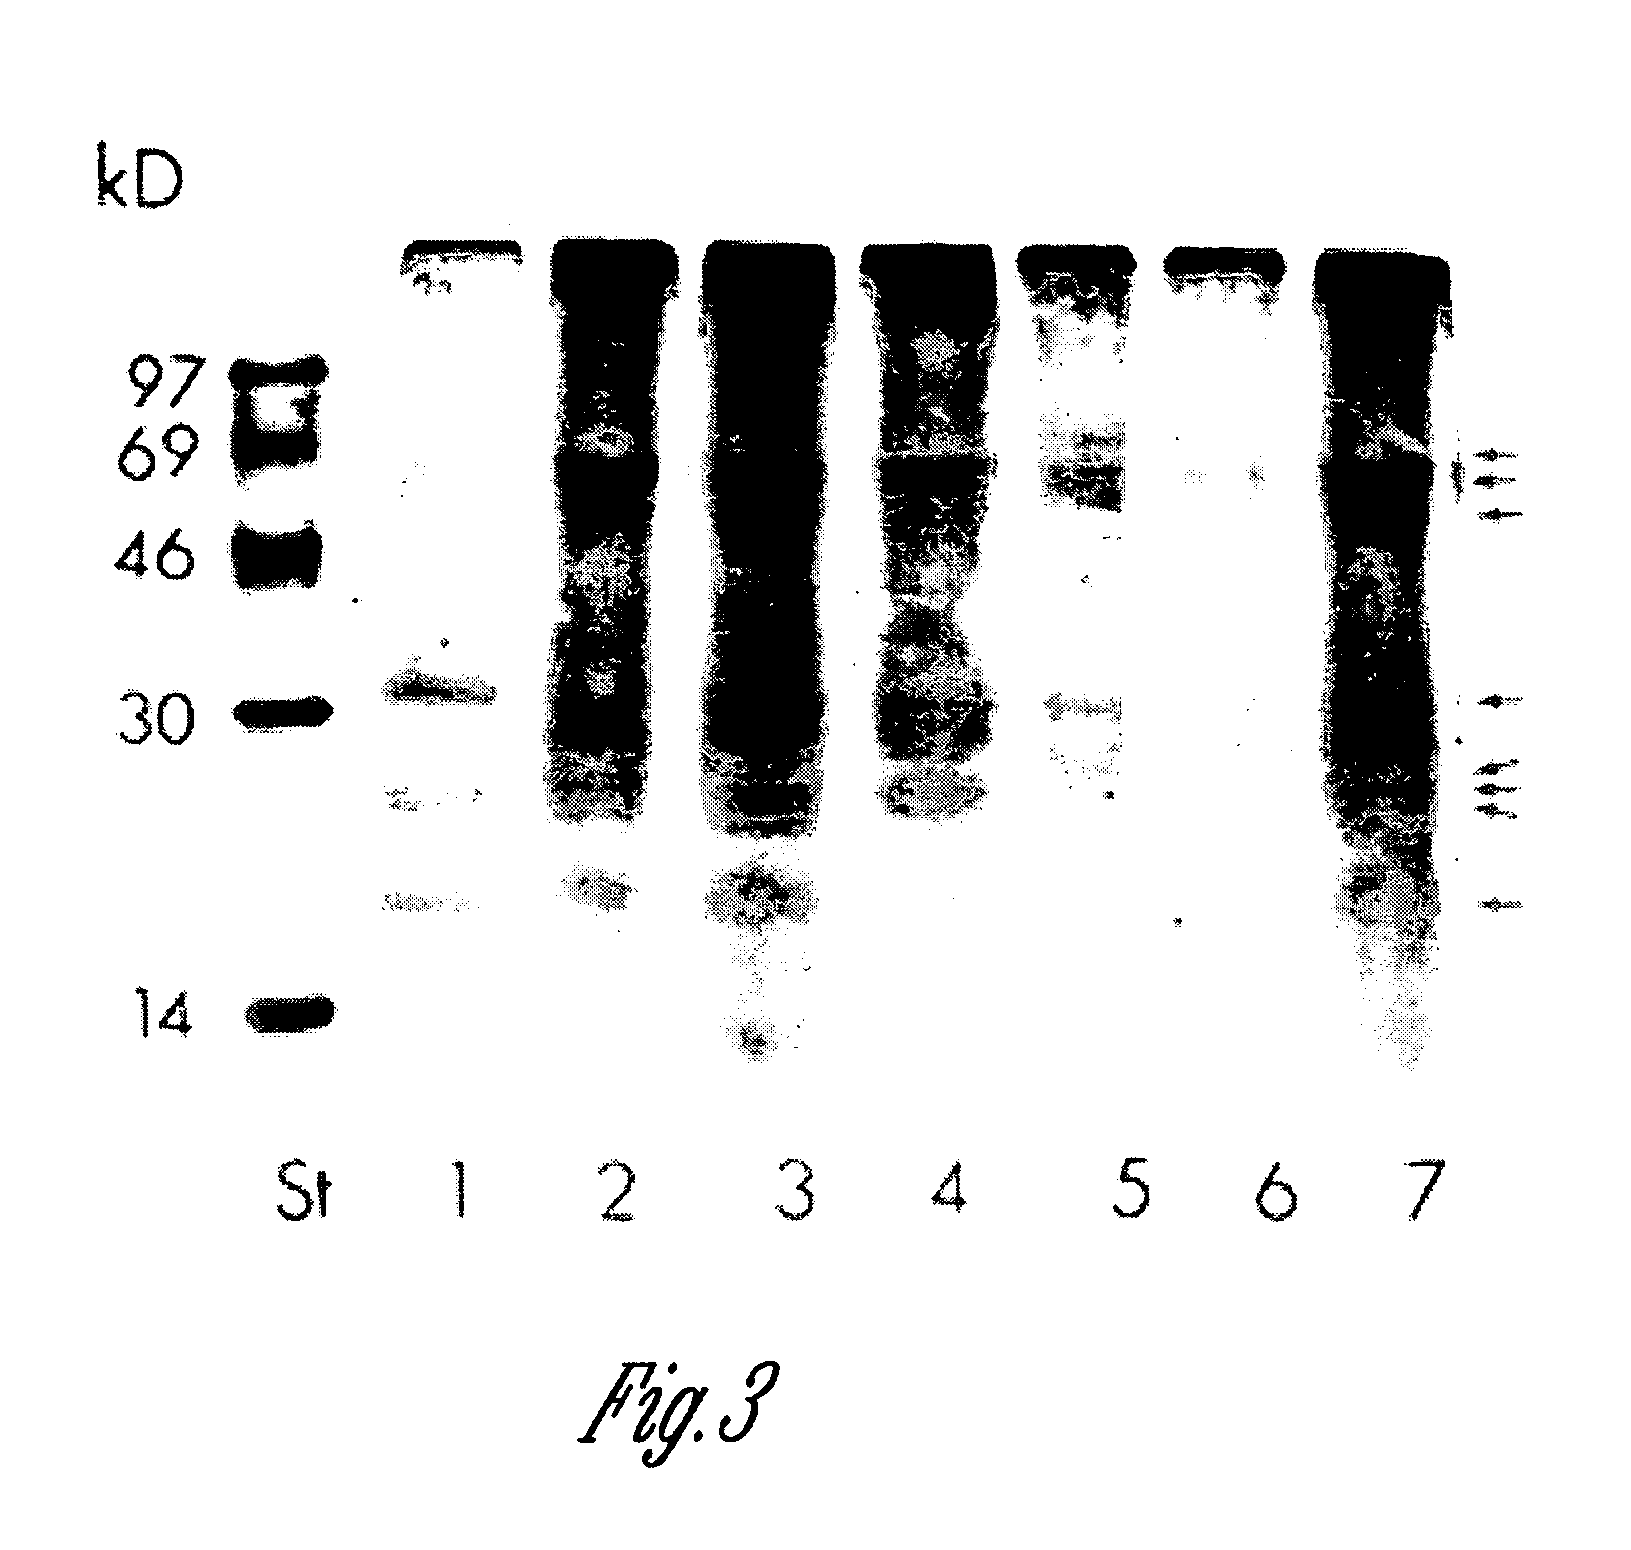 Maize chloroplast protein synthesis elongation factors and methods of use for same